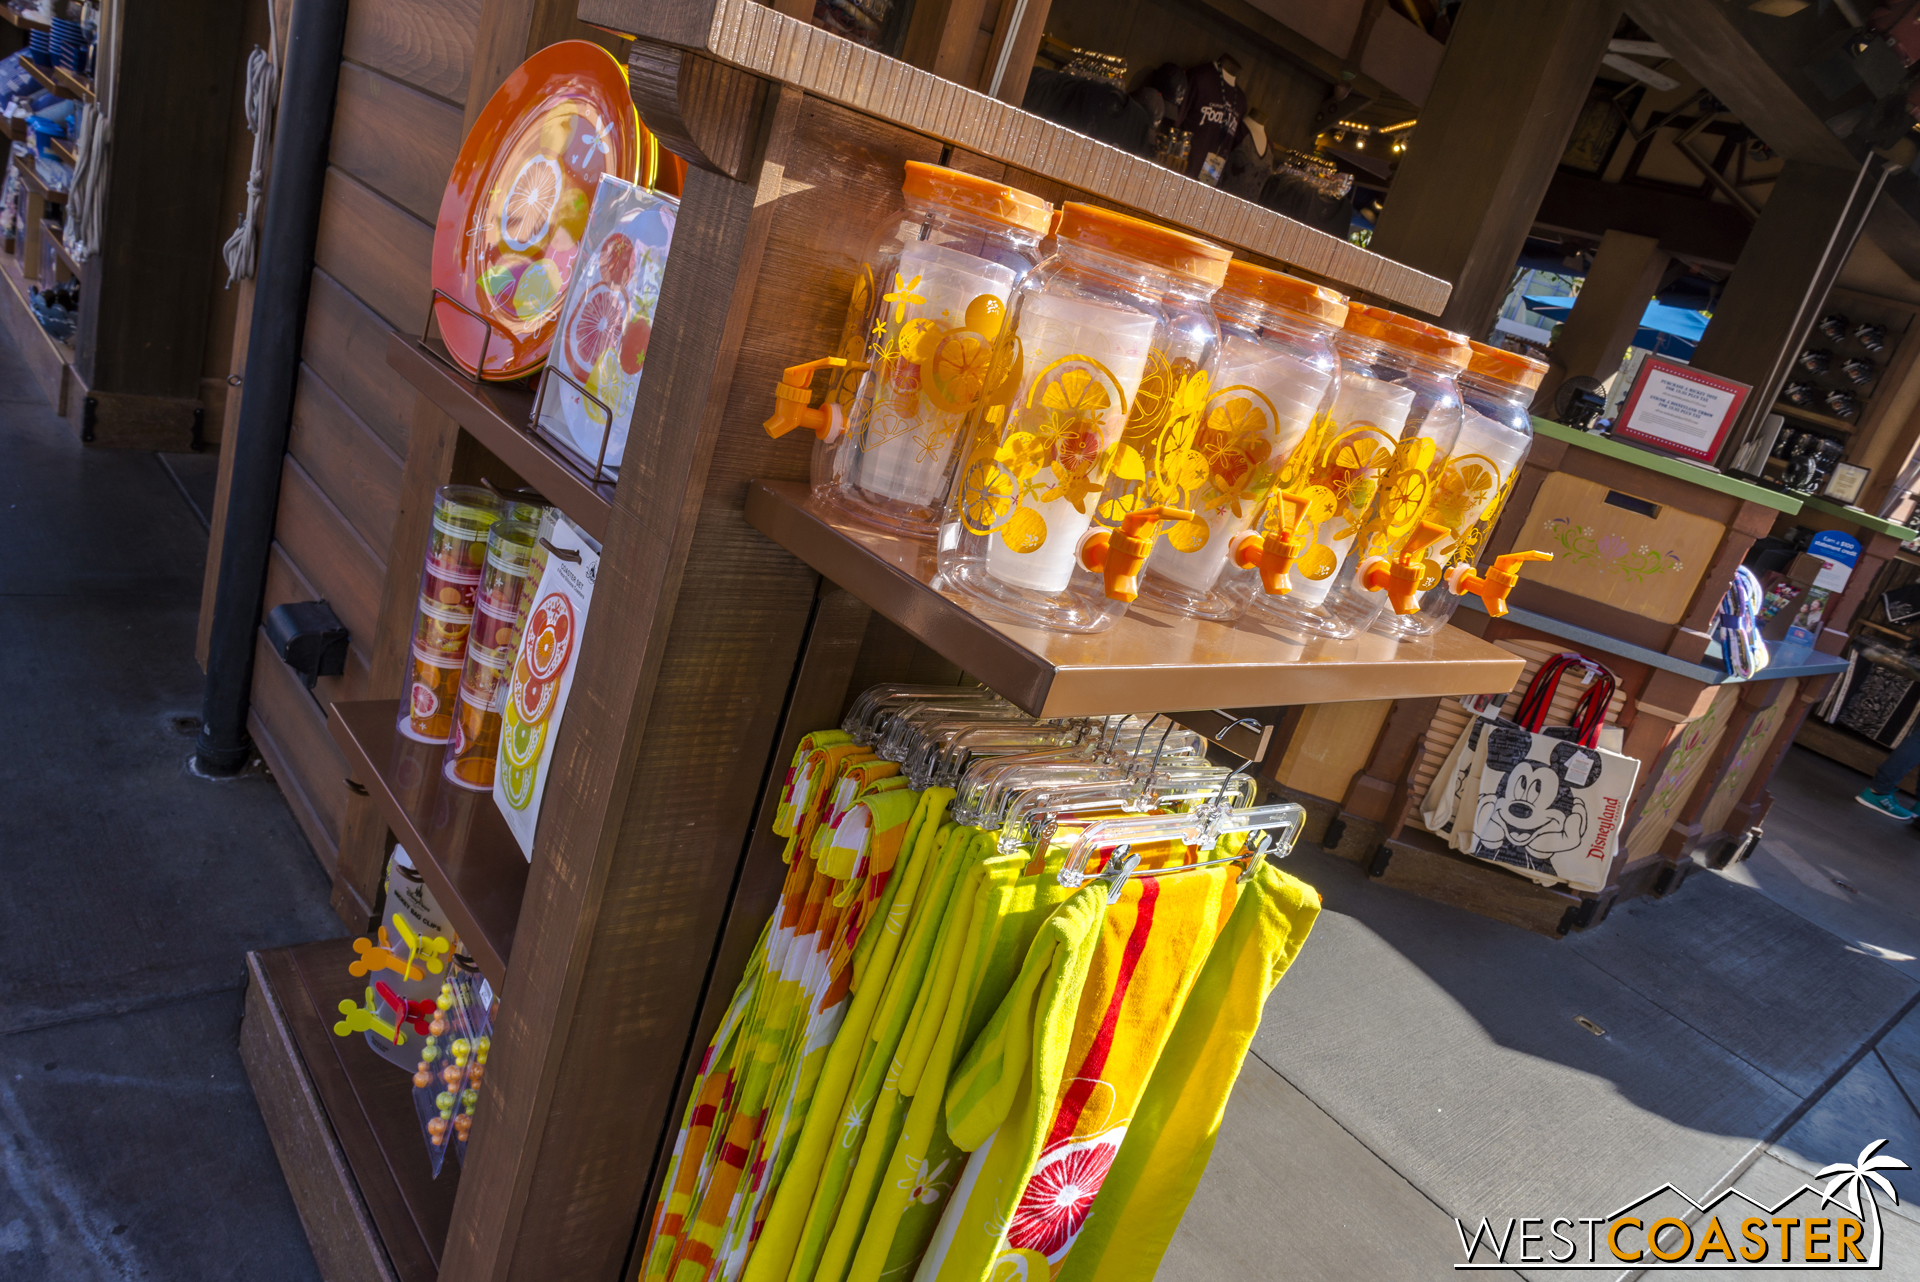  And though not specifically part of the Food &amp; Wine Festival, I thought this stand in Hollywood Land across from the old Muppetvision 3D Theater had some really fun tumblerware perfect for summer. 